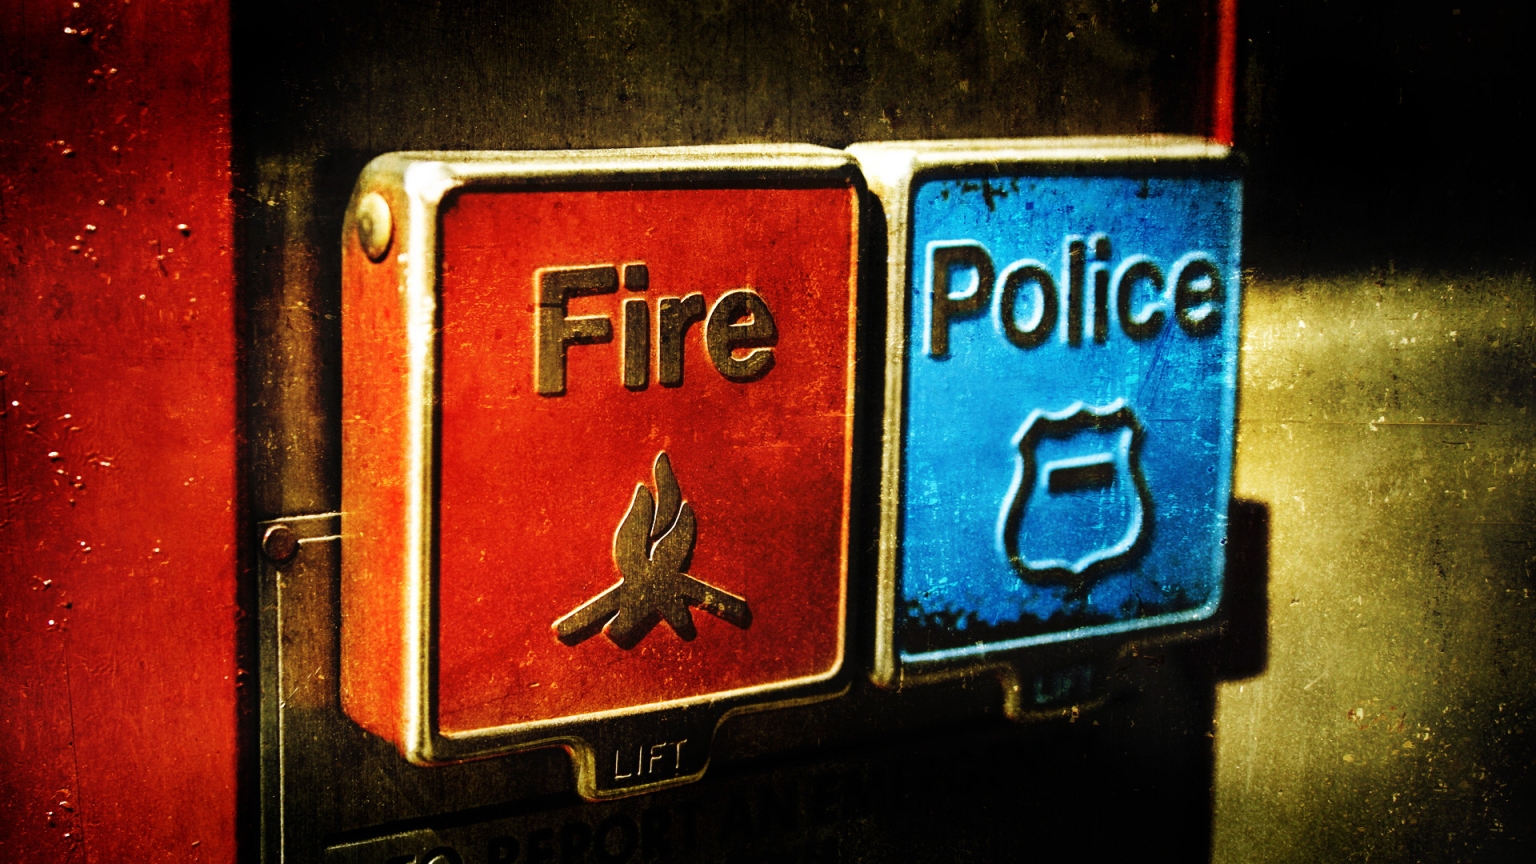 Emergency Fire and Police for 1536 x 864 HDTV resolution